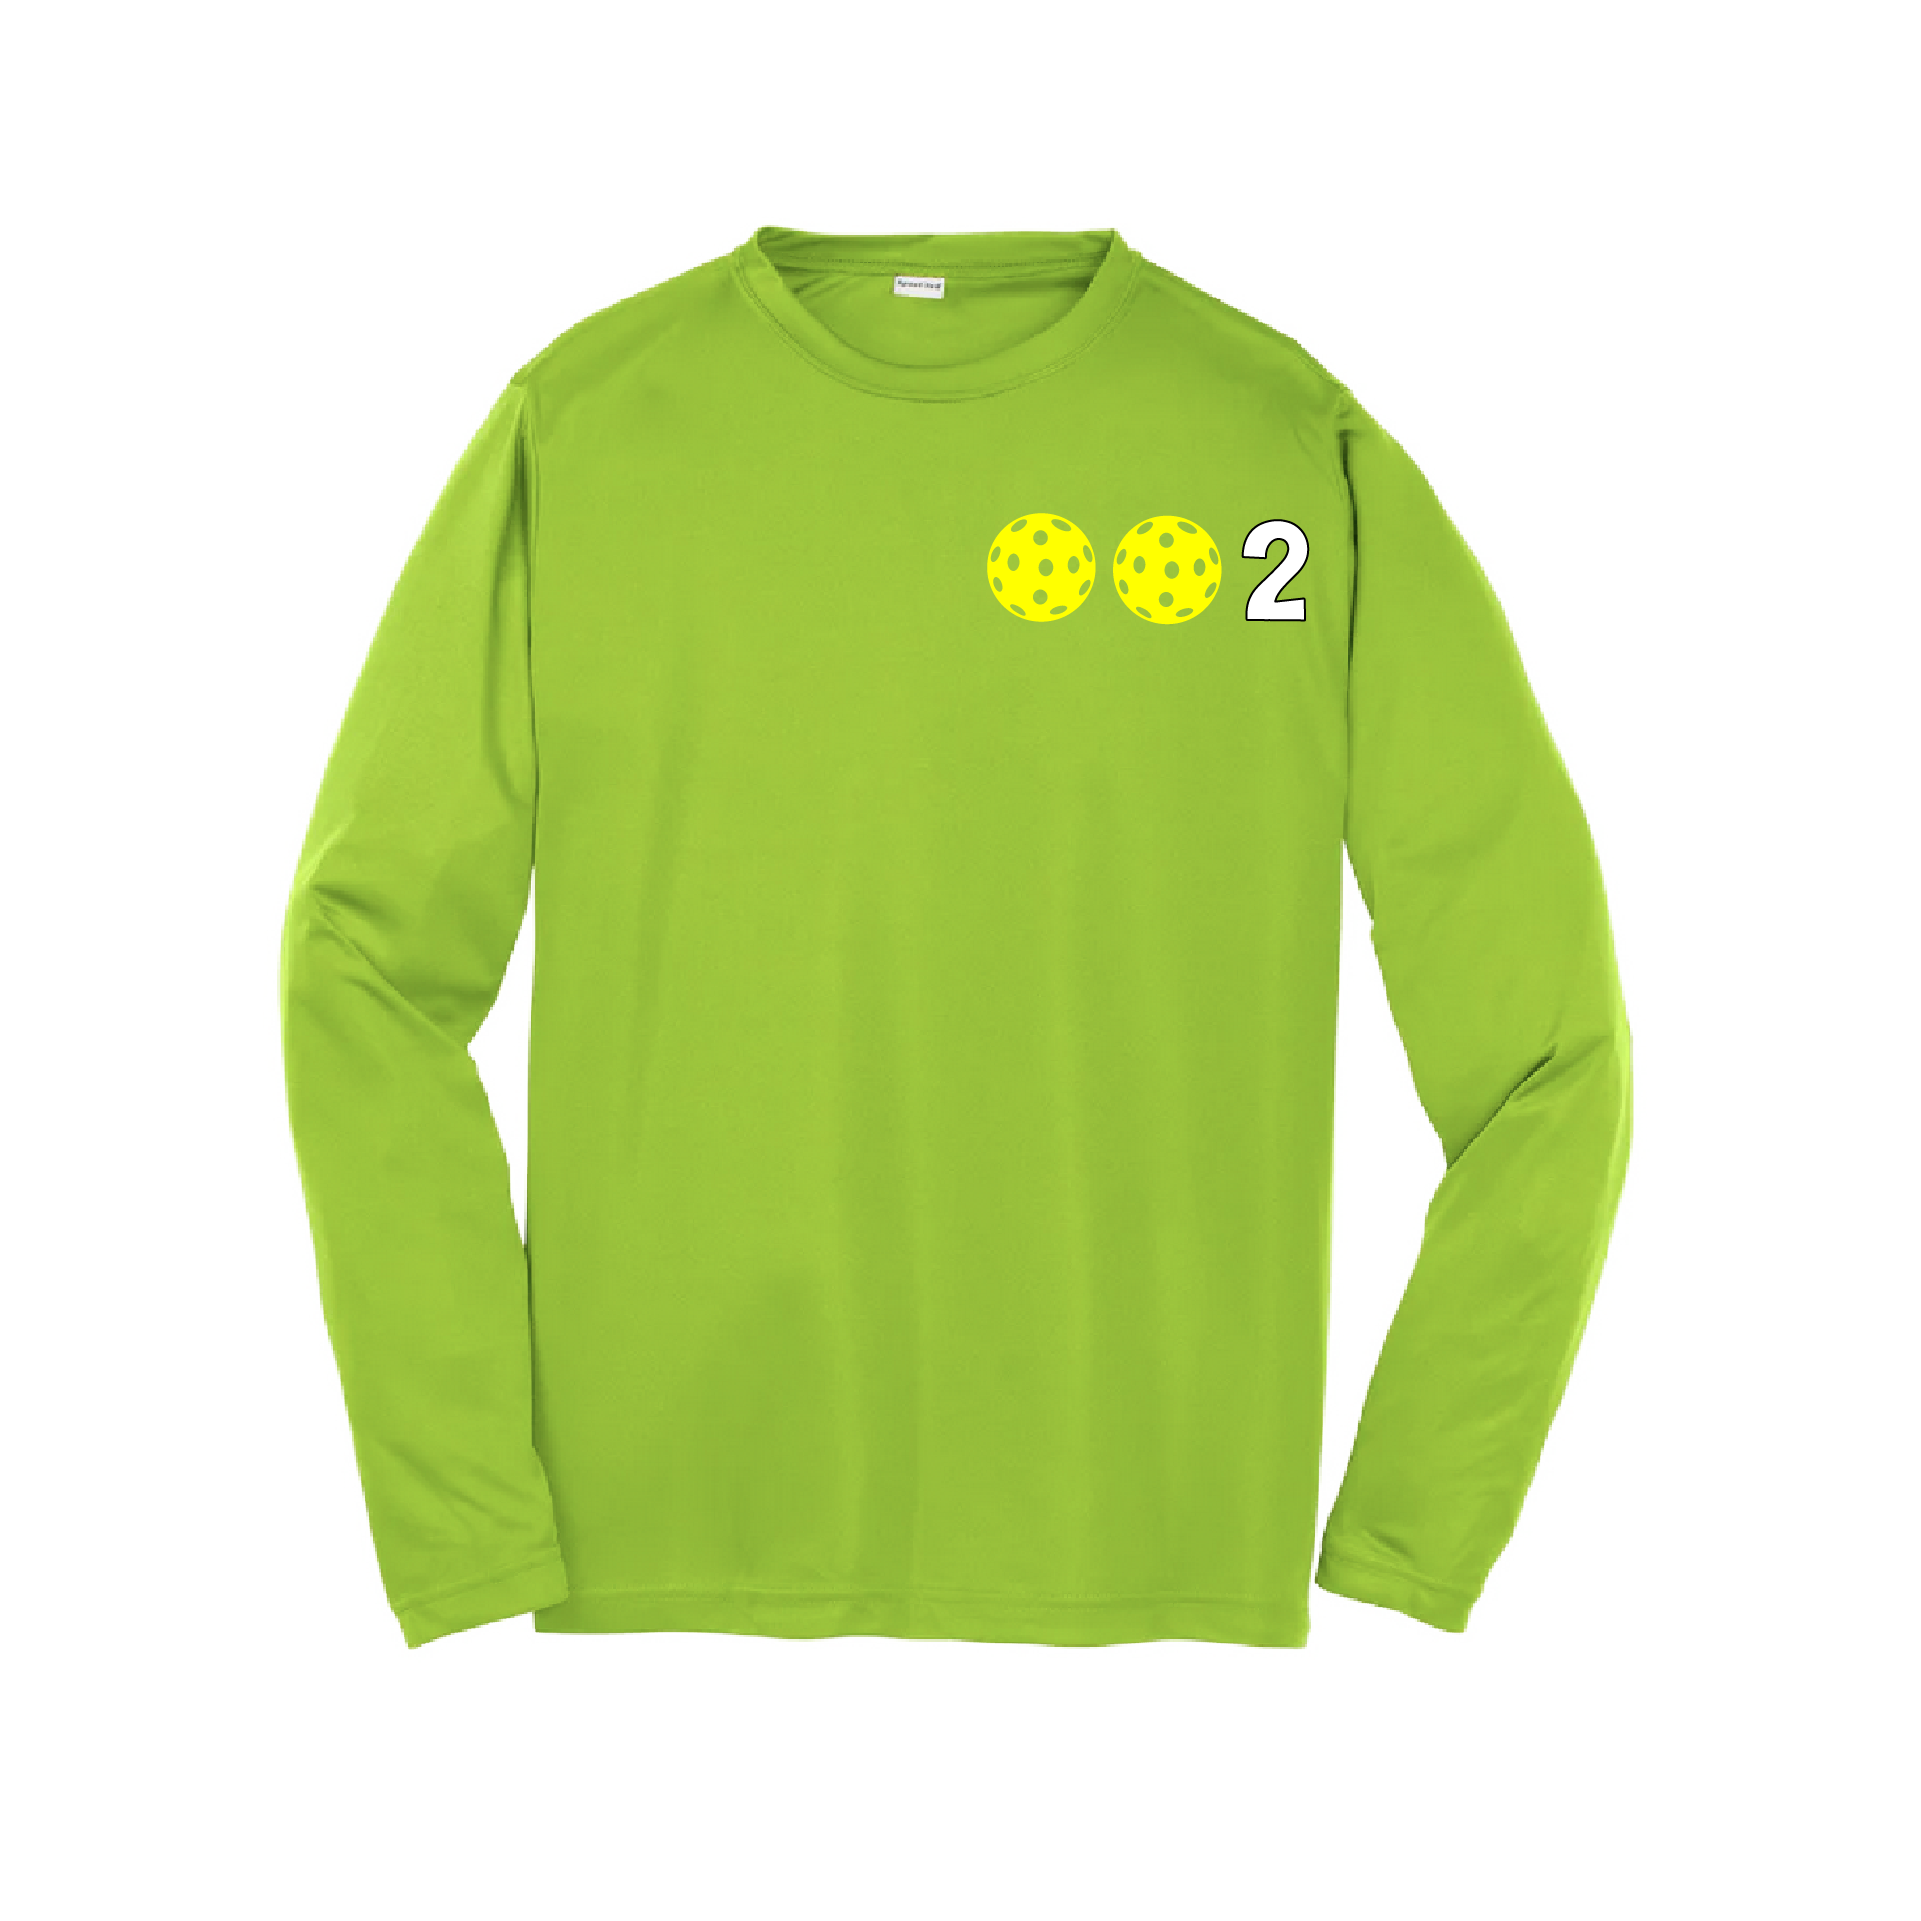 Design: 002 with Customizable Ball Colors (Yellow, Green, White)  Youth Styles: Long Sleeve (LS)  Shirts are lightweight, roomy and highly breathable. These moisture-wicking shirts are designed for athletic performance. They feature PosiCharge technology to lock in color and prevent logos from fading. Removable tag and set-in sleeves for comfort.